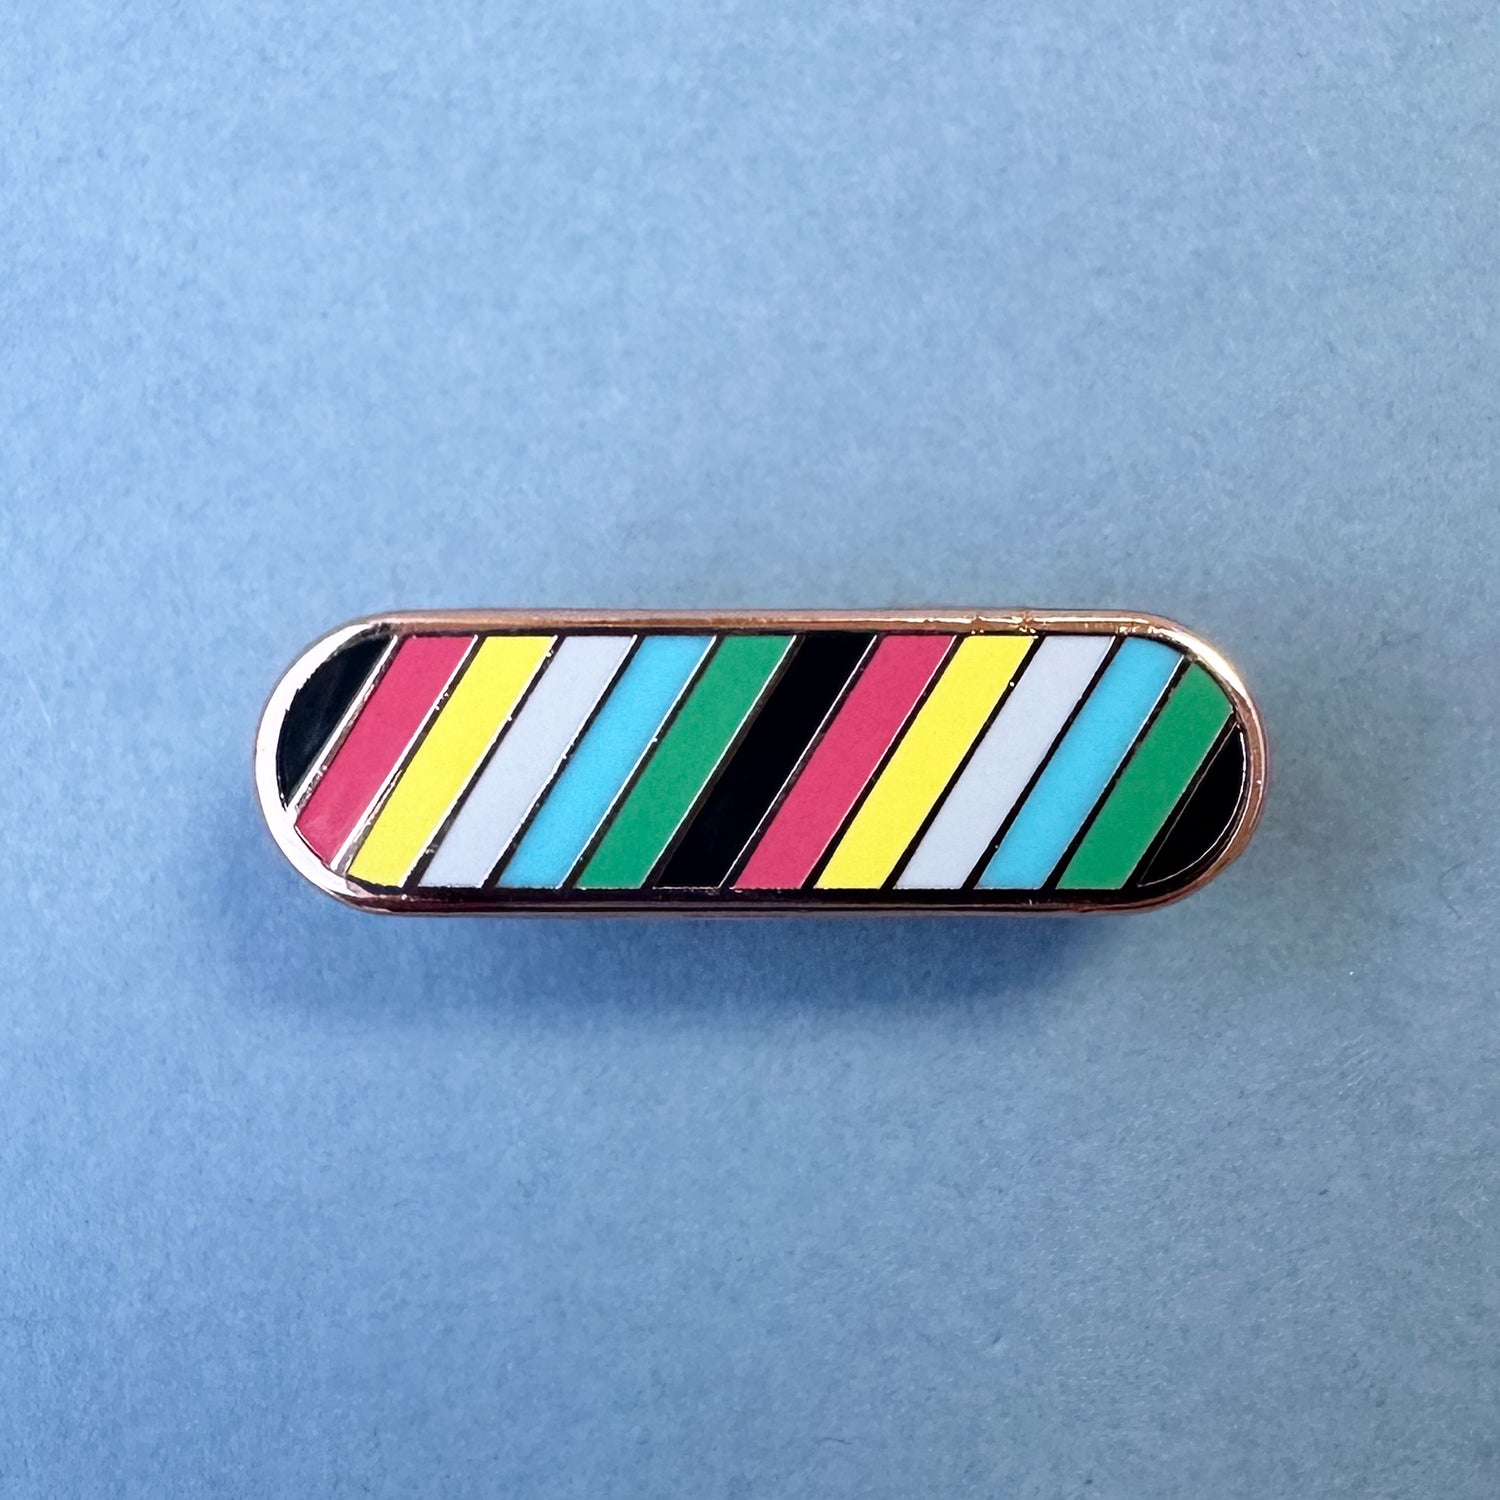 A long oval shaped pin with diagonal stripes of the colors of the Disability Pride flag. The pin is on a grey background.